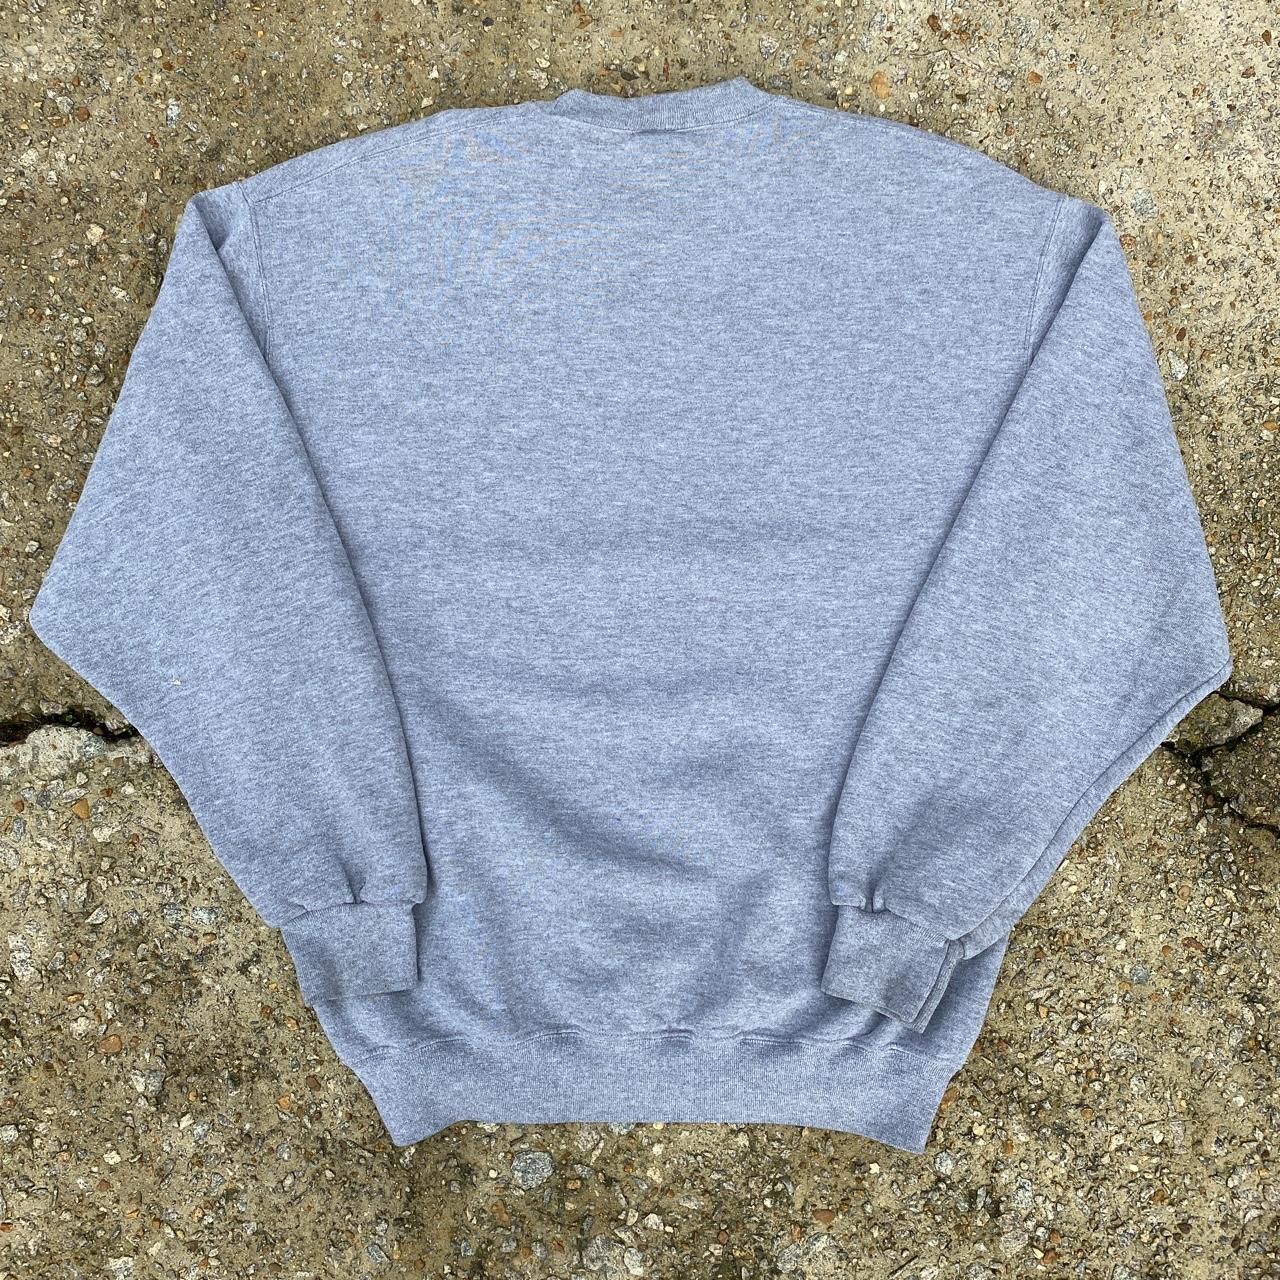 Russell Athletic Men's Grey and White Sweatshirt (2)